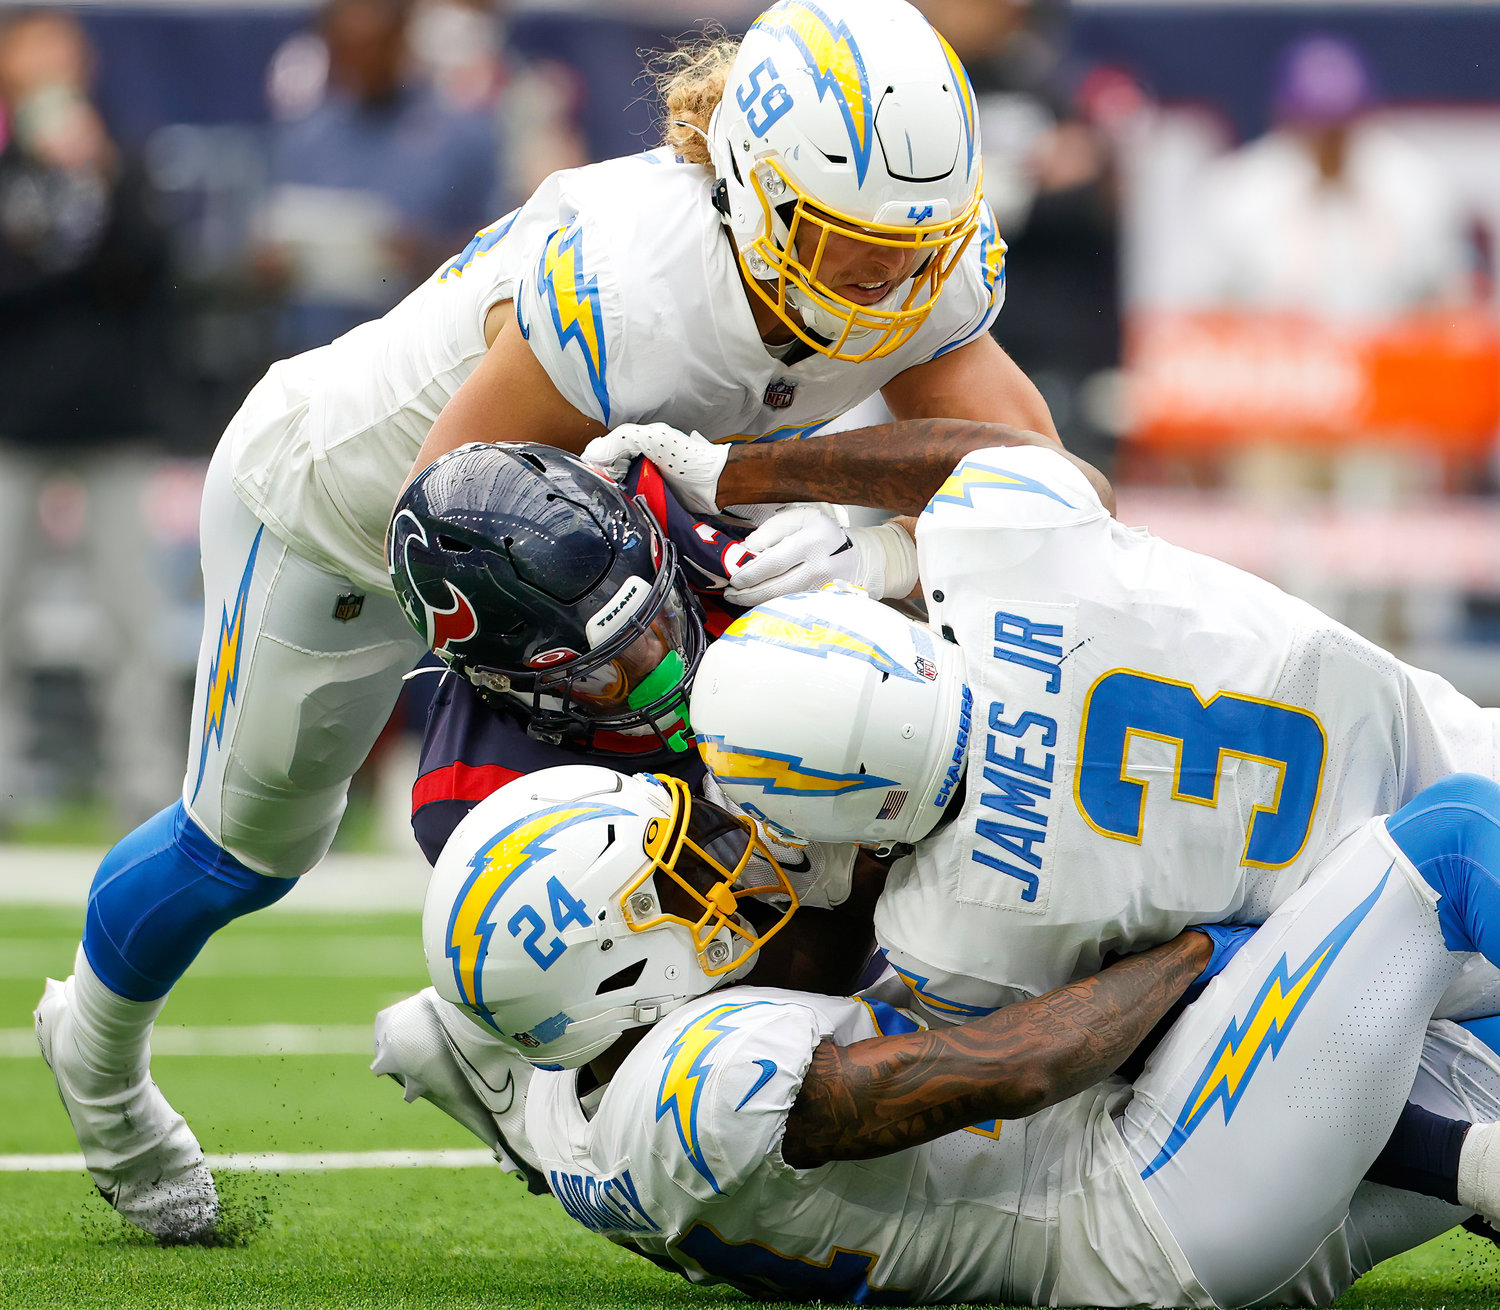 Texans running back Dameon Pierce (31) is wrapped up by a group of Chargers defenders during an NFL game between the Texans and the Chargers on Oct. 2, 2022 in Houston. The Chargers won 34-24.